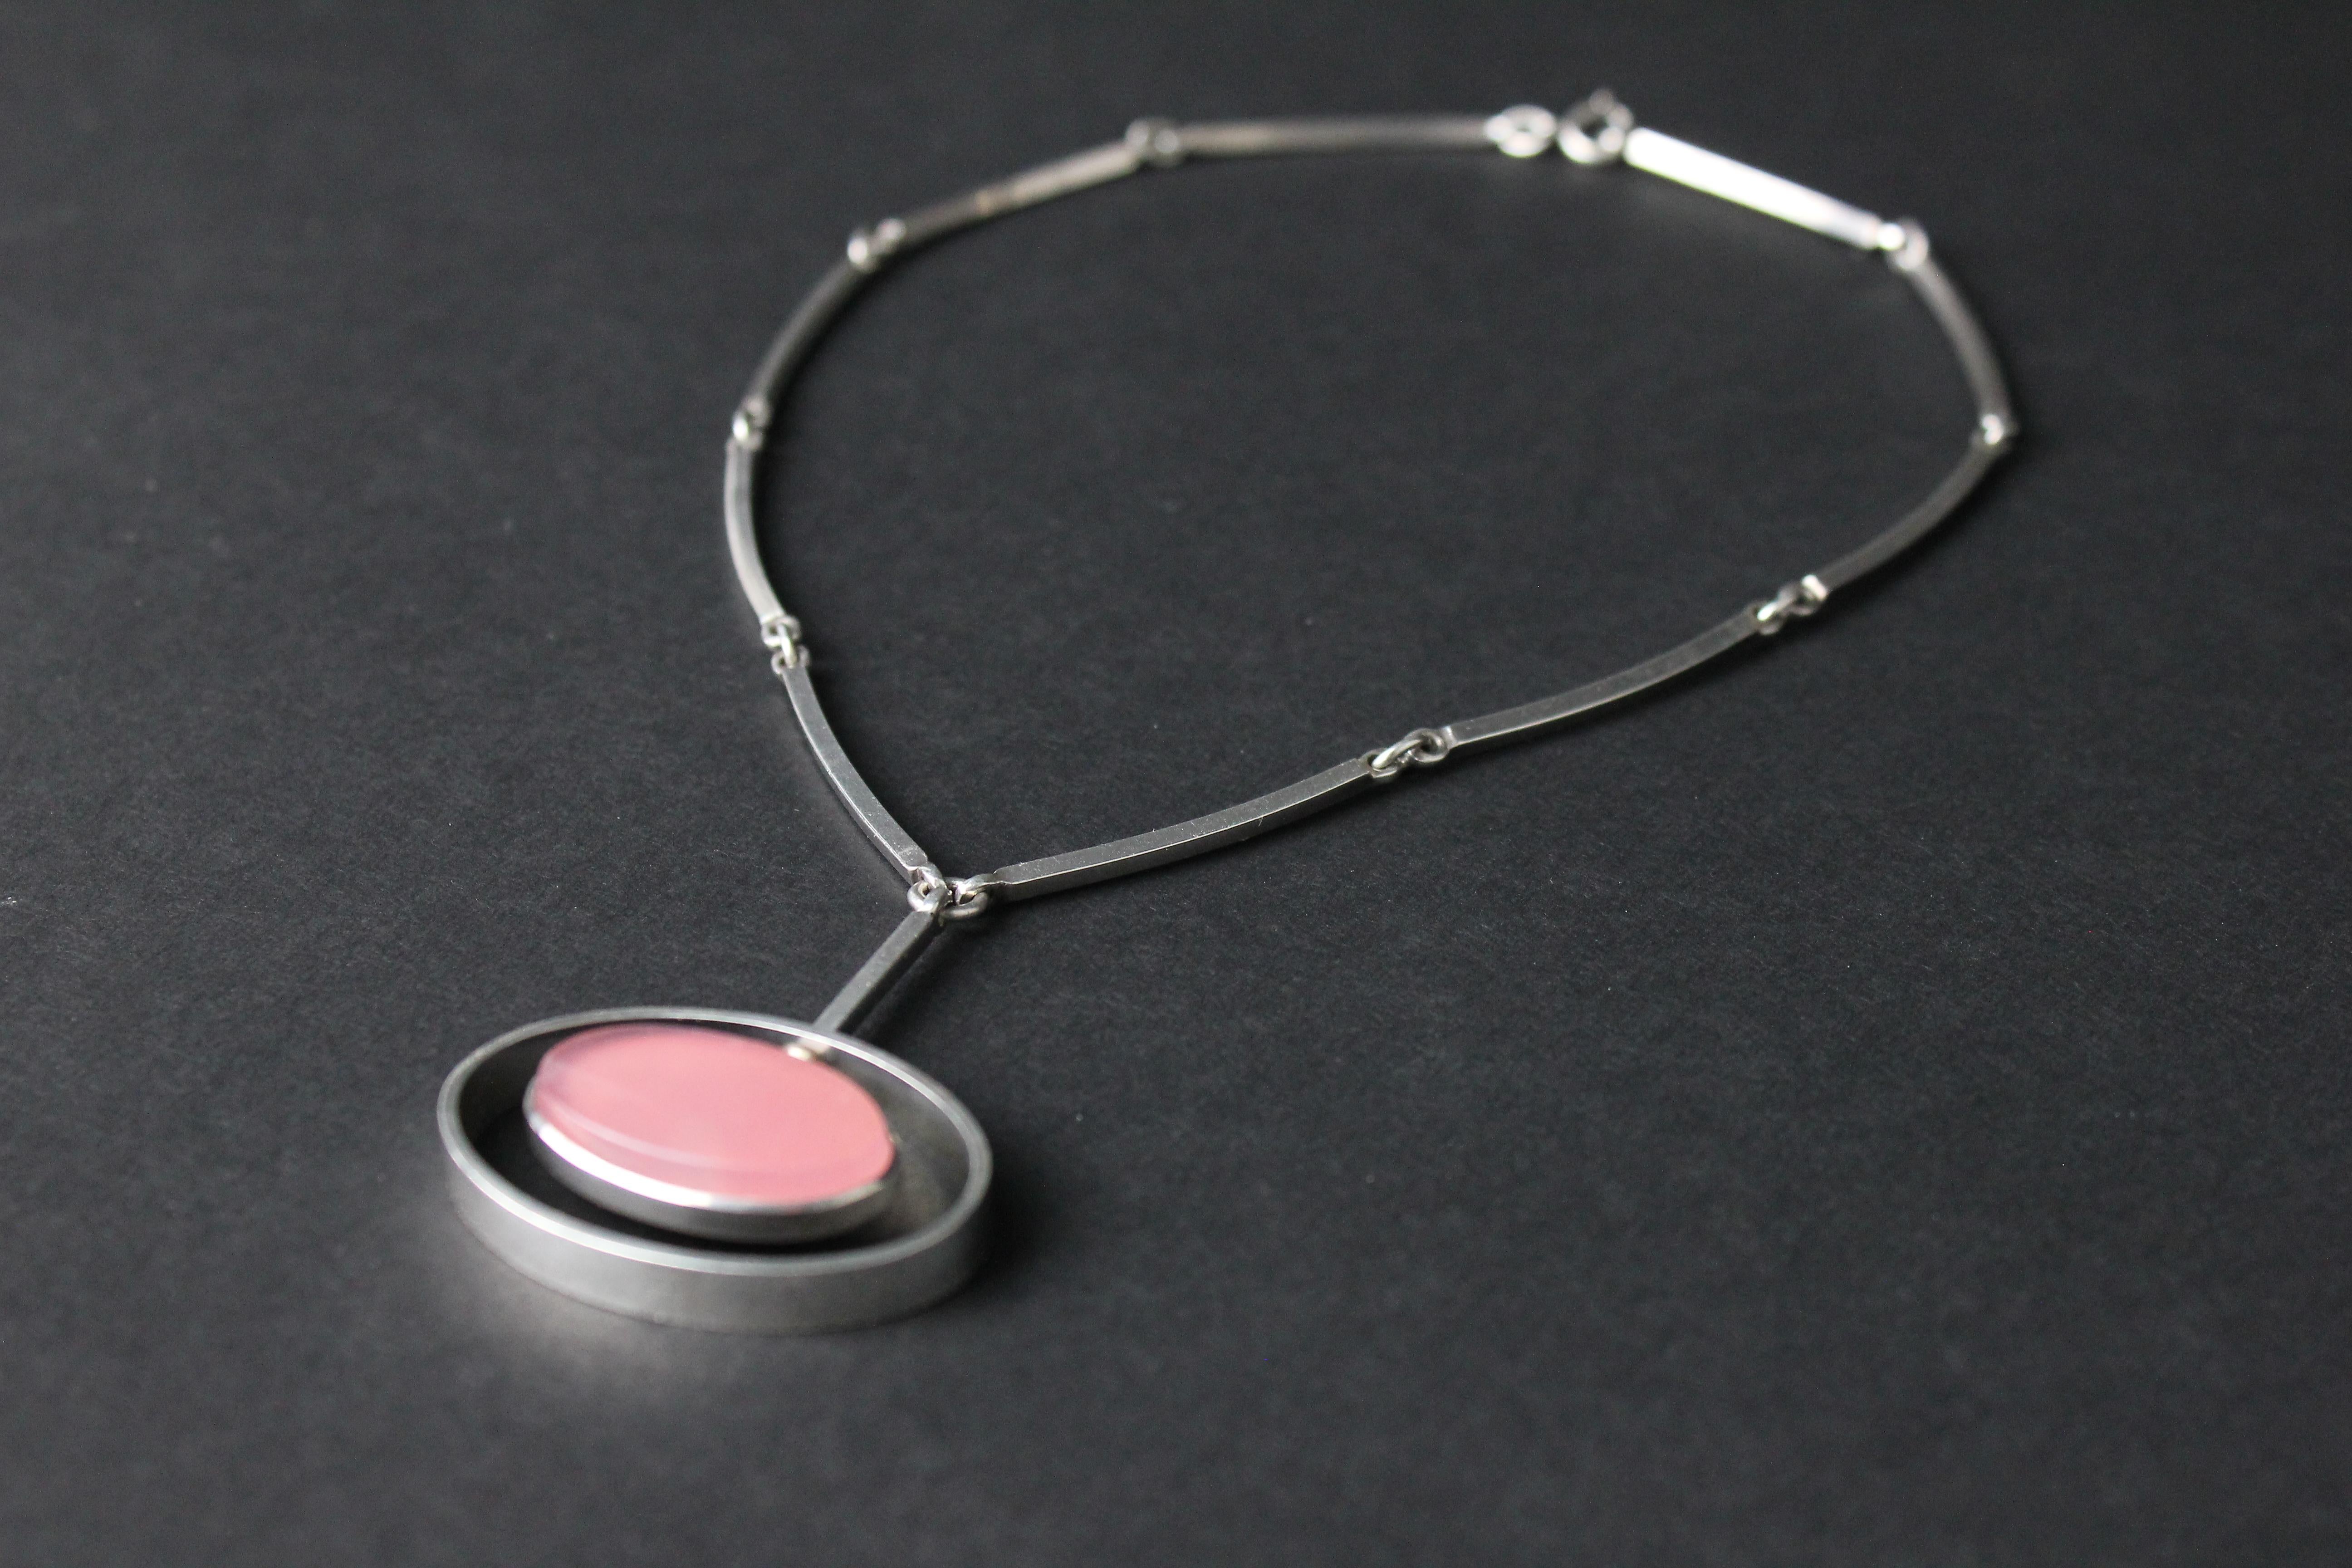 Very modern and stylish necklace by famous Danish firm NE From.
The length of the pendant is 5cm, 4cm wide. Flat oval cut rose quartz.
Very good condition.

NIELS ERIK FROM
The Danish silversmith Niels Erik From opened his studio in 1931 at the age